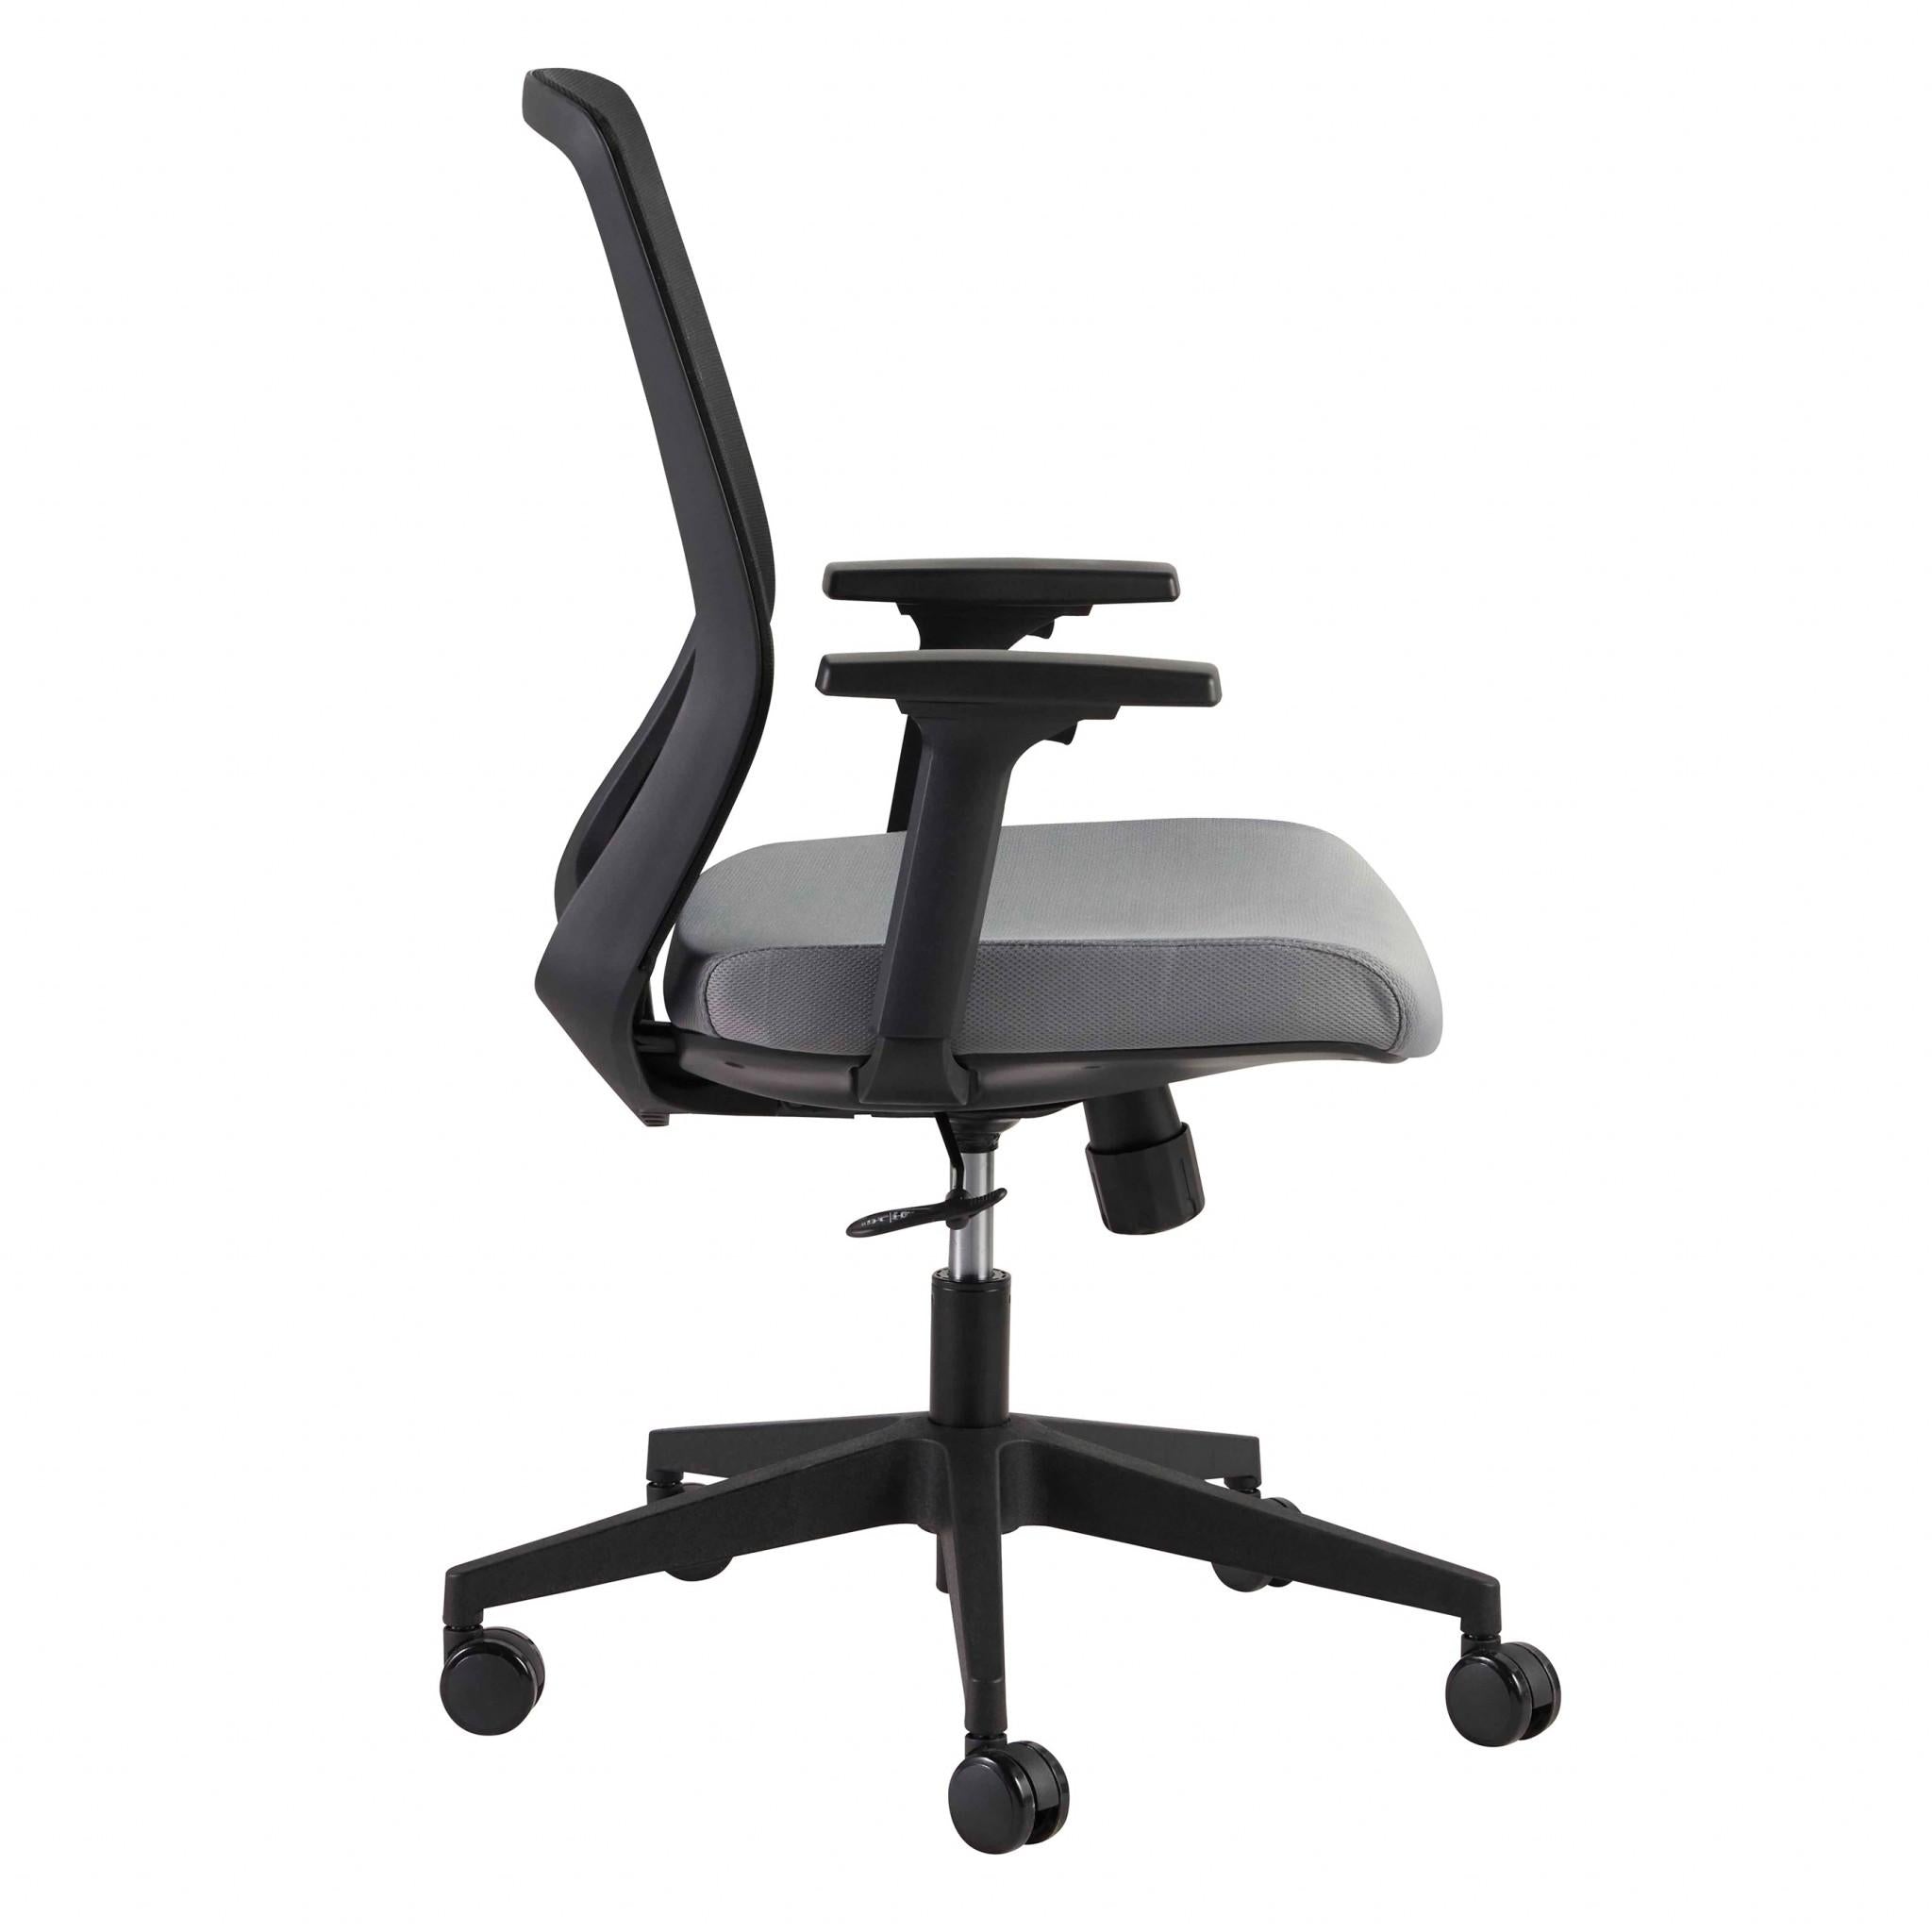 Gray and Black Mesh High Back Office Chair